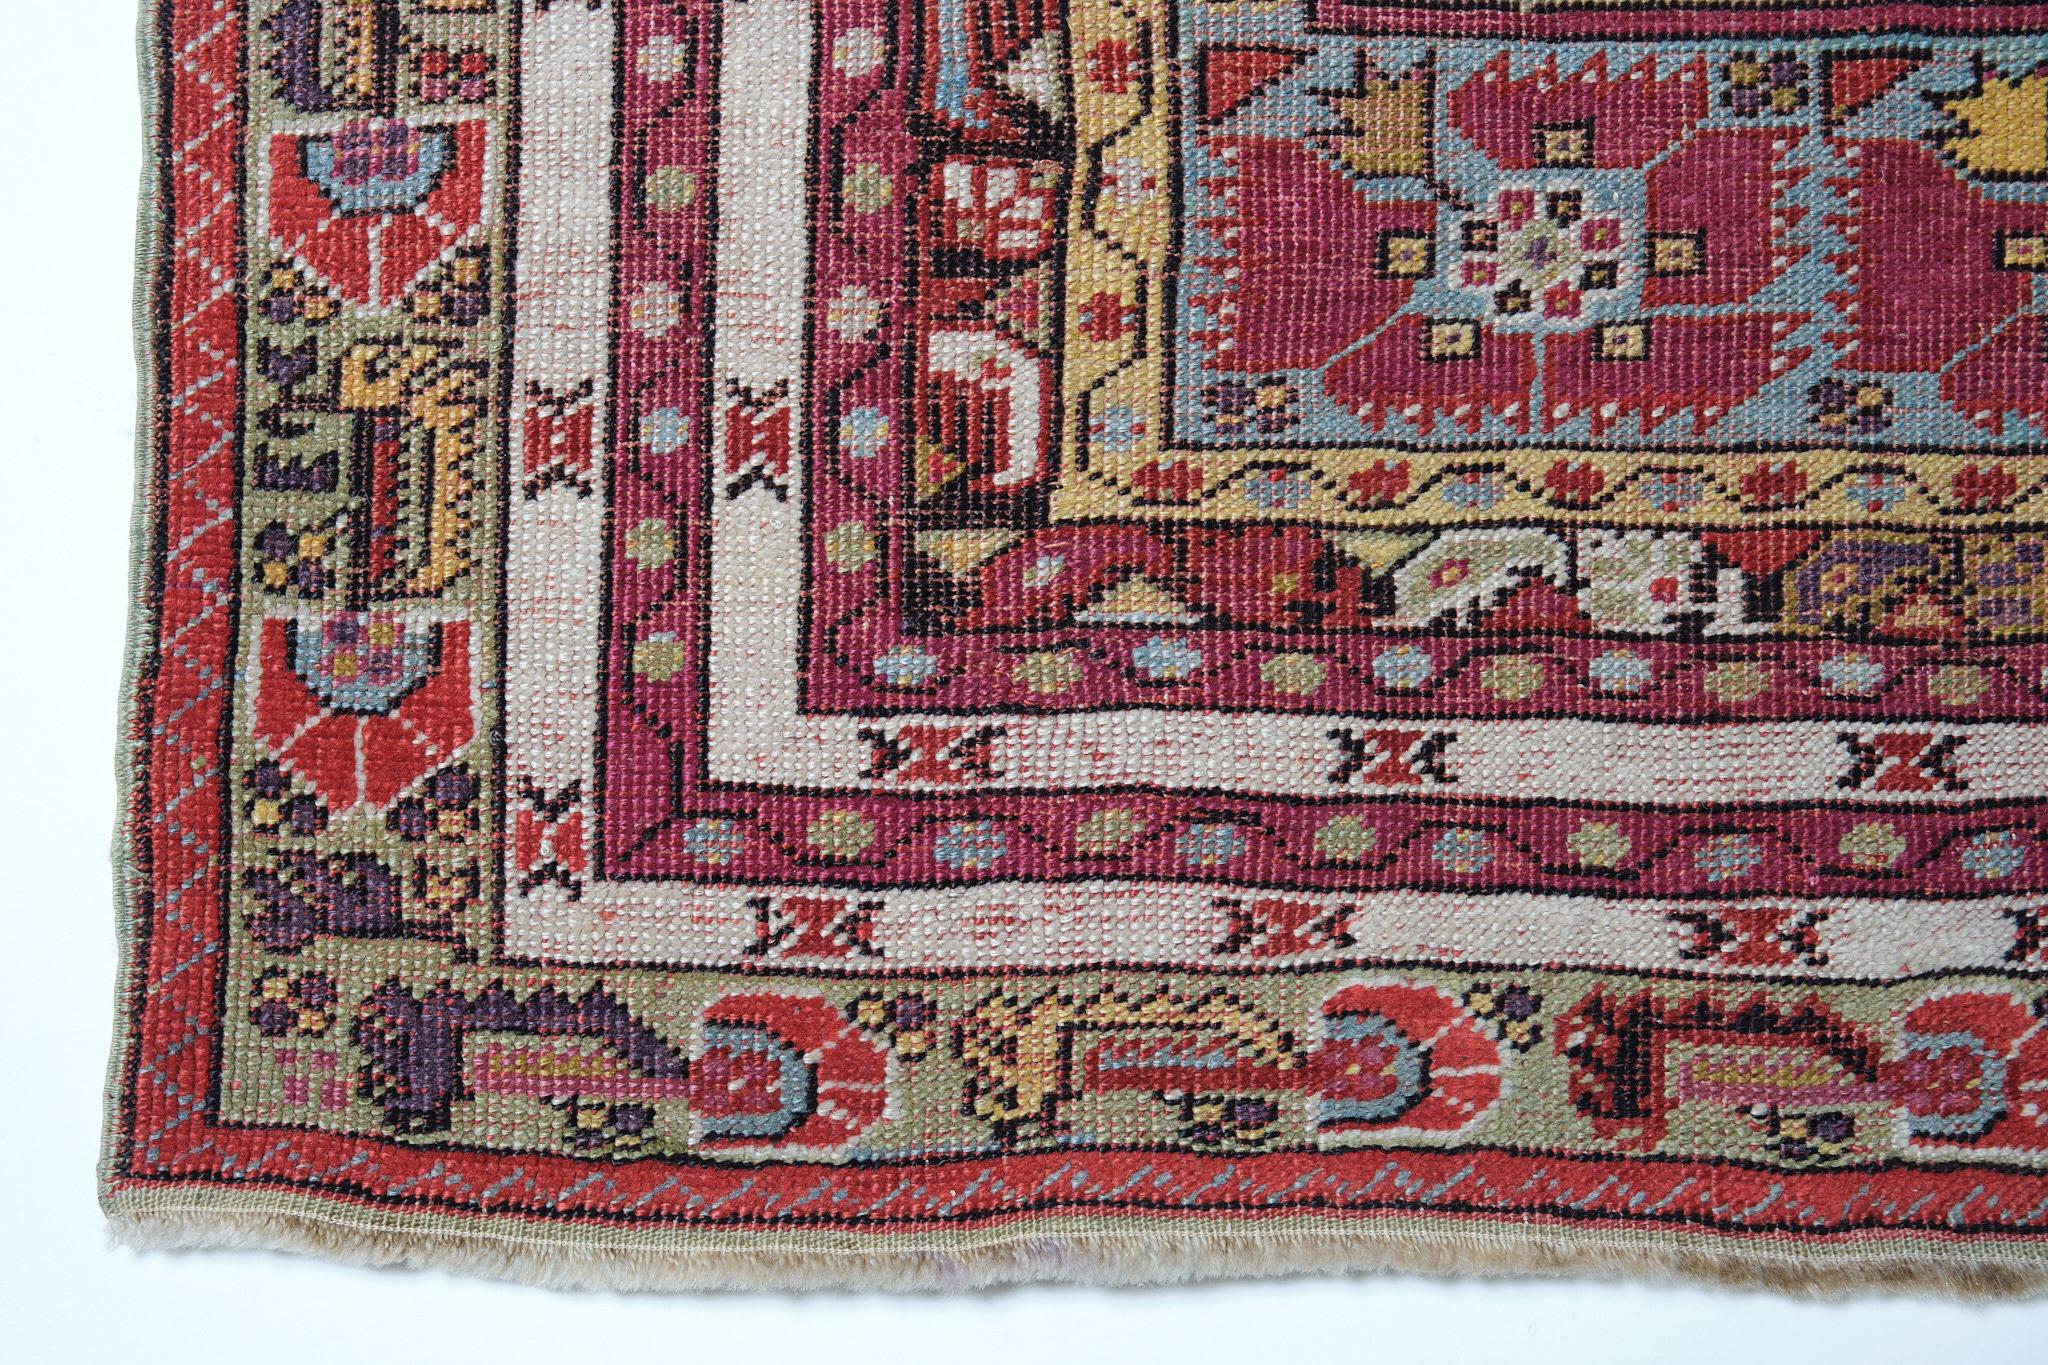 This is an antique Mucur rug from Central Anatolia, the Kirsehir region with a red background, good condition, and beautiful color composition. 

The town of Mudjar (or Mucur) is about twenty miles southeast of Kirsehir. The area has a long